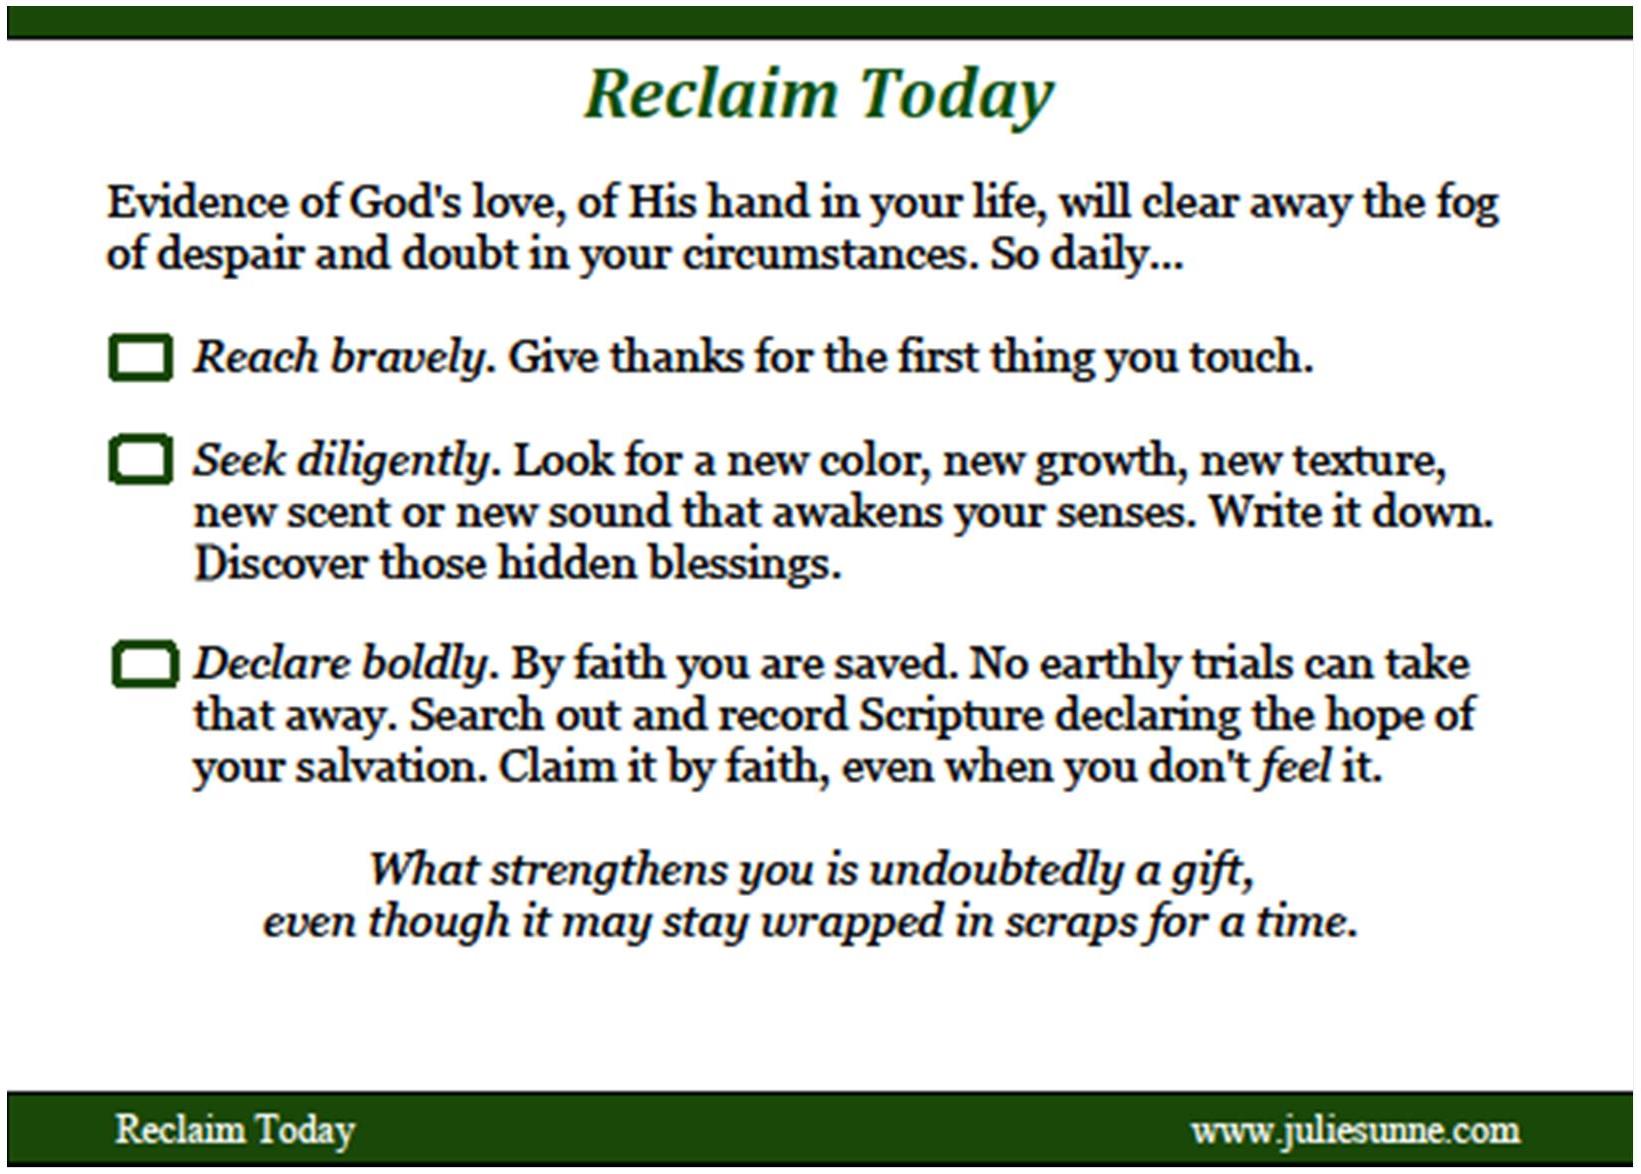 Reclaim Today Action Card